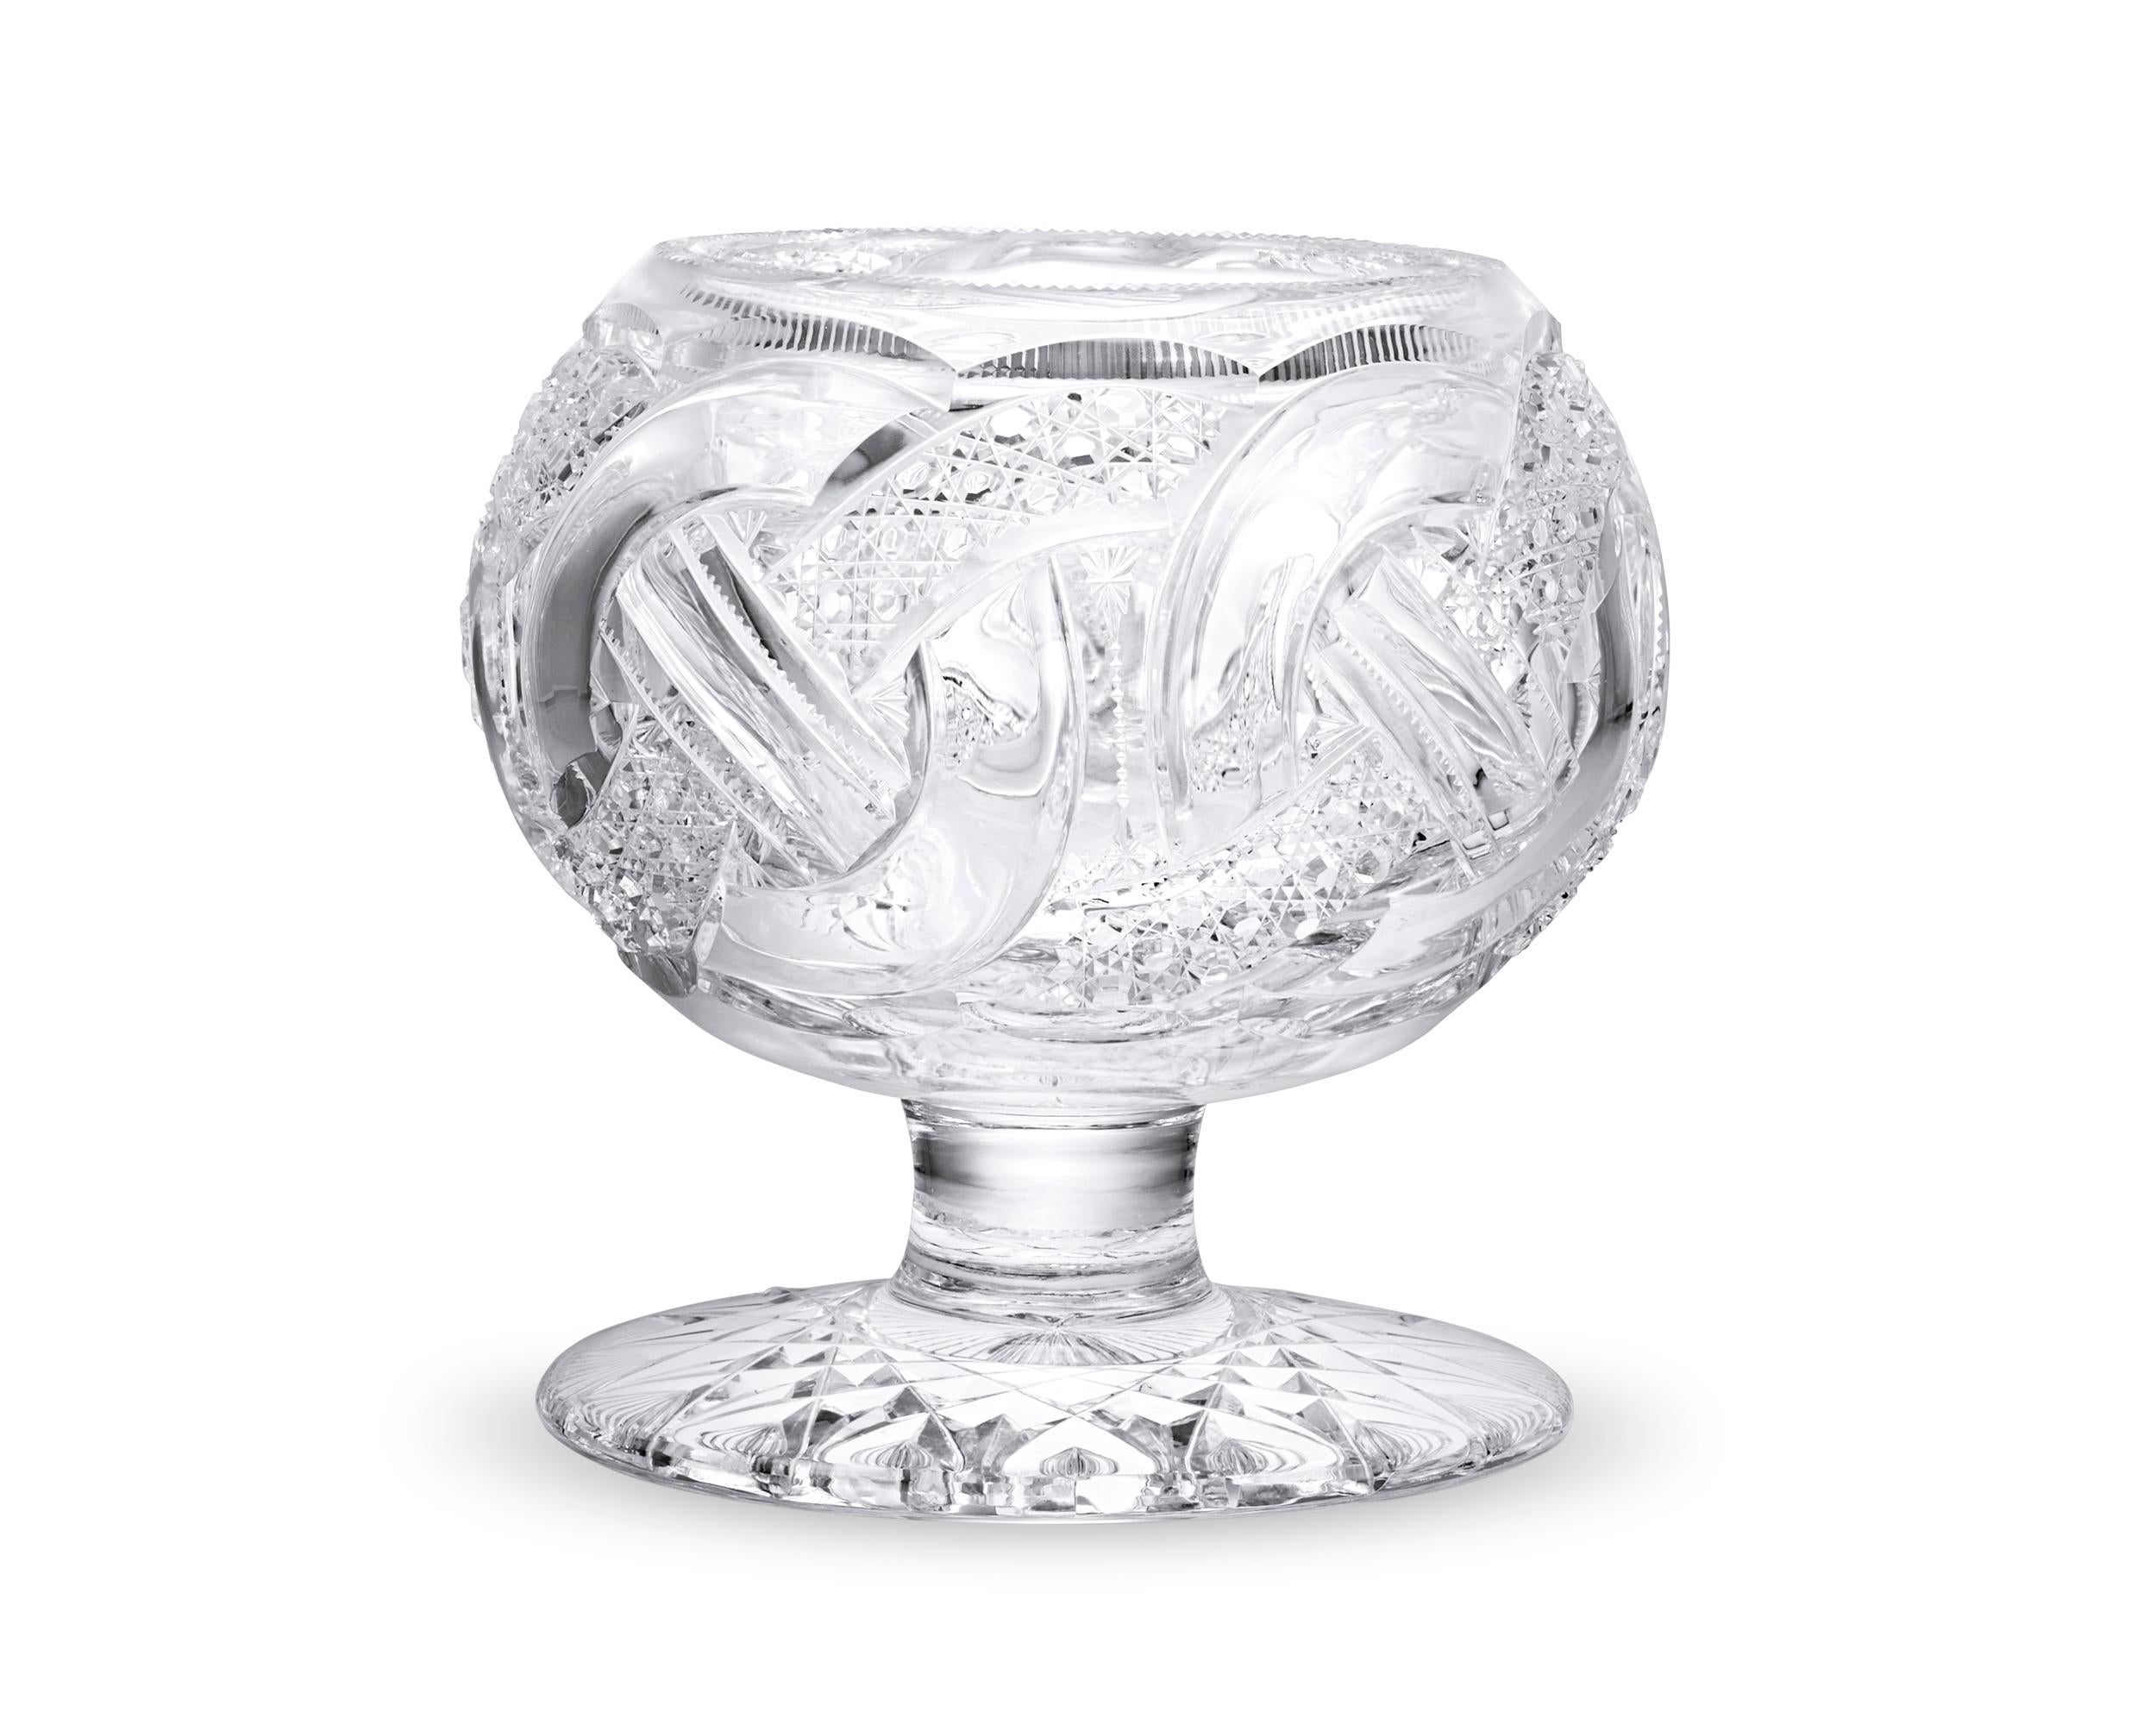 This incredibly rare footed rose bowl by J. Hoare & Co. is hand-crafted in the highly sought-after Wedding Ring pattern. This coveted American Brilliant Period cut glass pattern is characterized by a swirling motif of conjoined rings, executed with